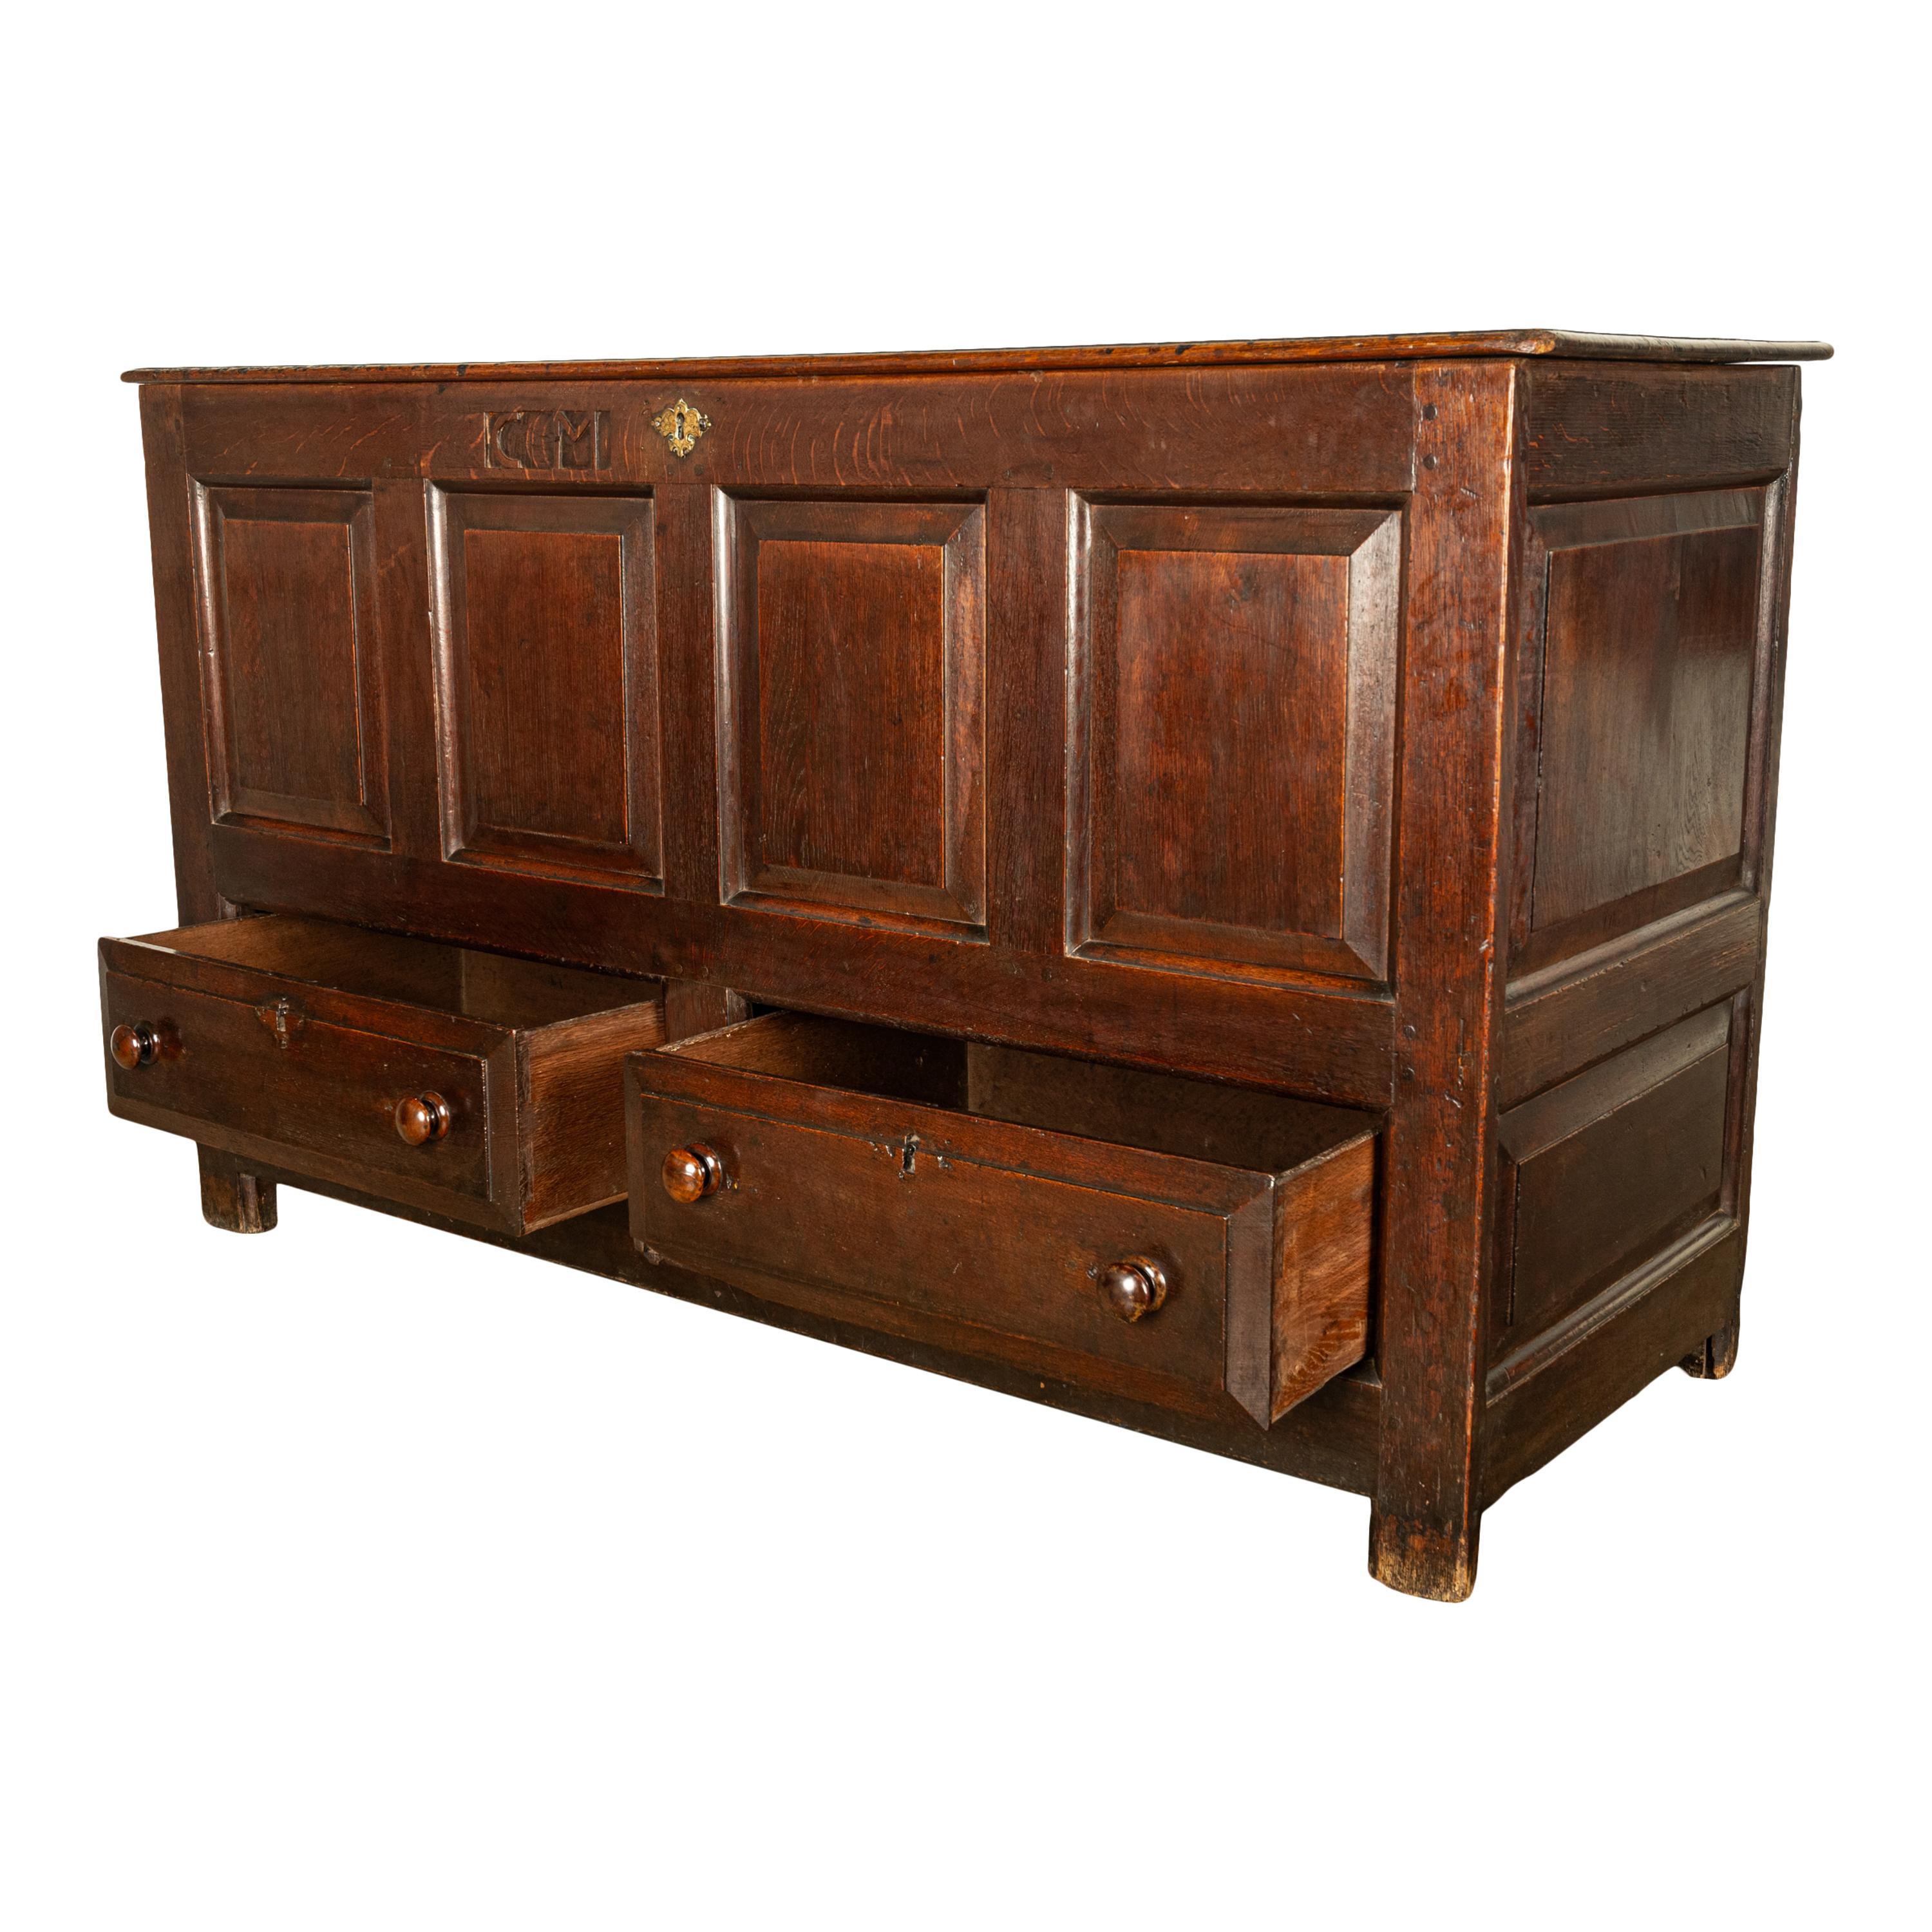 Monumental Antique Georgian Joined Oak Mule Dowry Chest Coffer Yorkshire 1720 For Sale 6